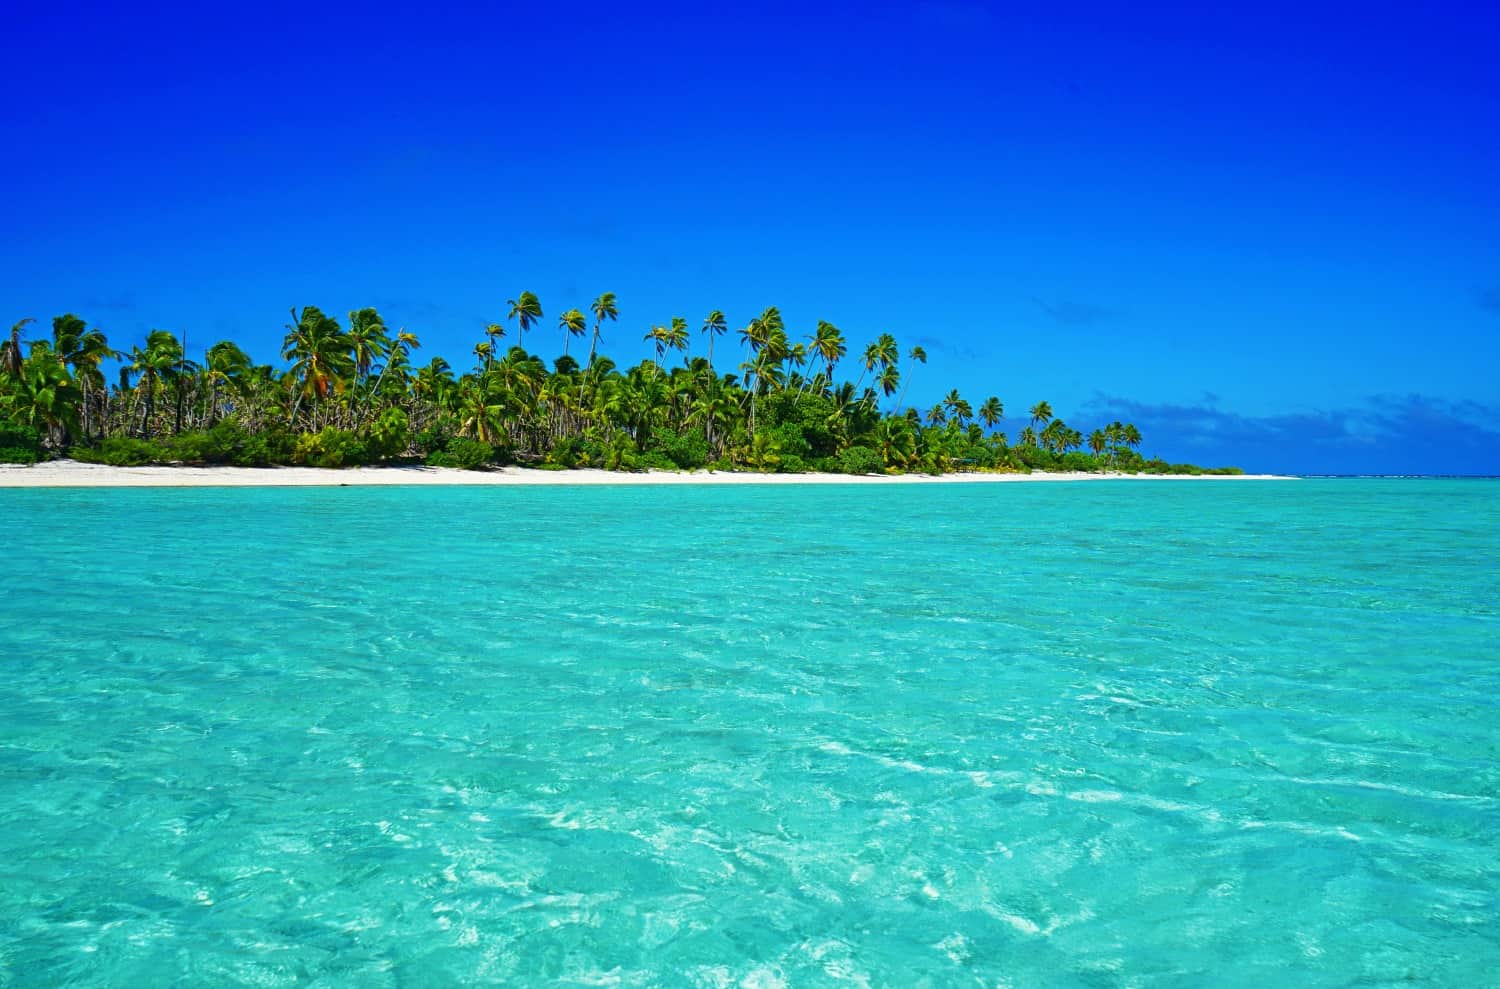 The lagoon in Aitutaki, the Cook Islands. It definitely has to be the prettiest place I've ever visited